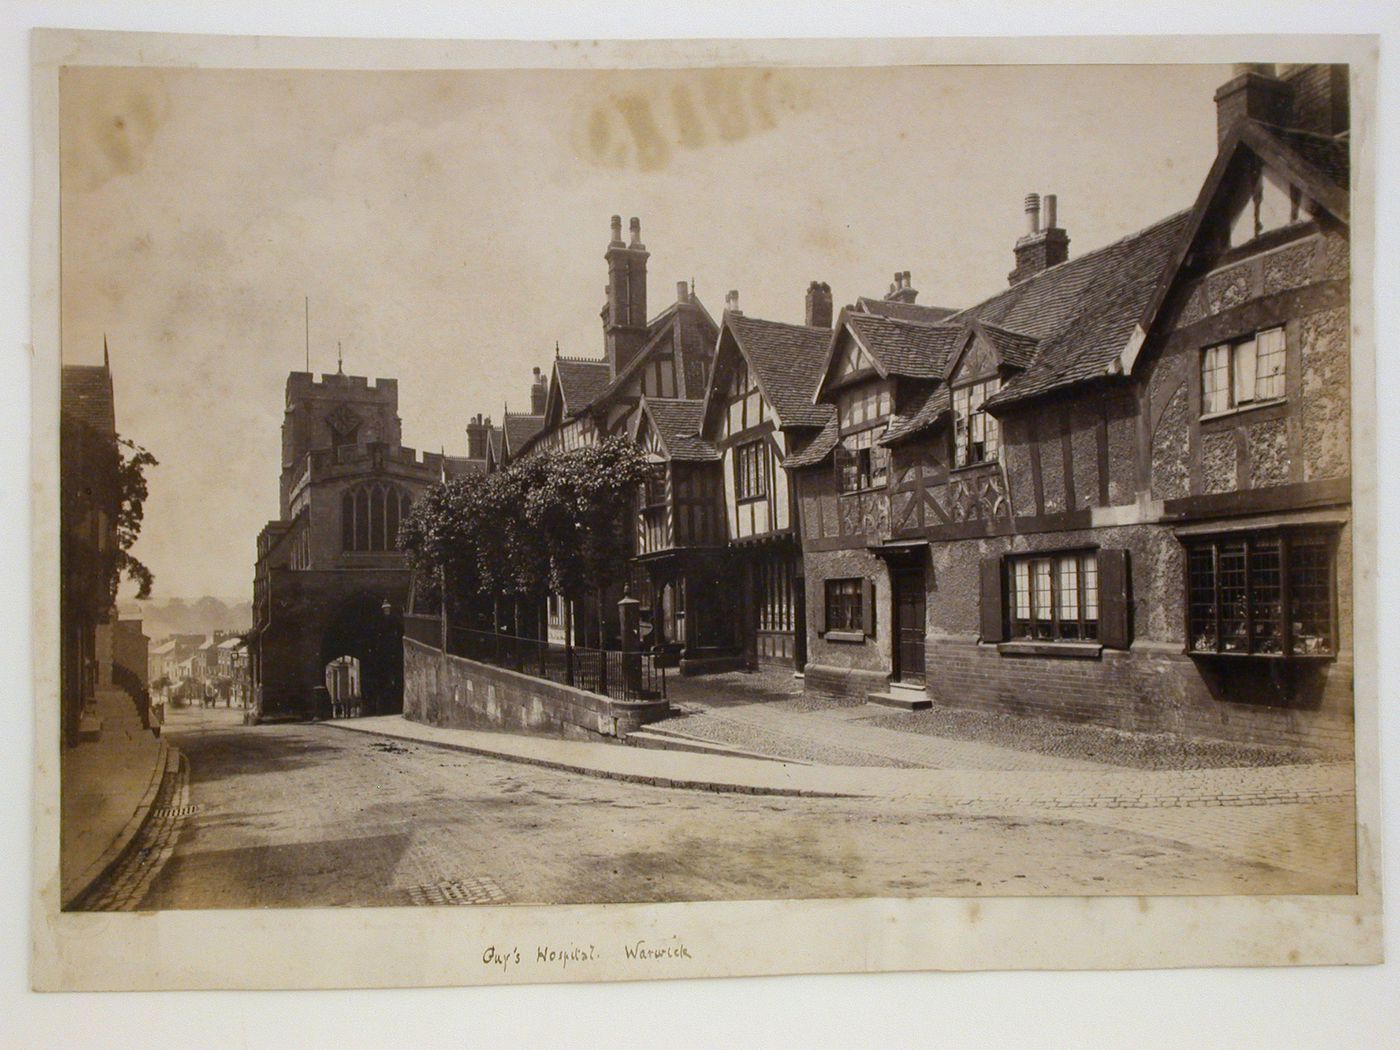 Guy's Hospital, view from town street amidst town houses, Warwick, England